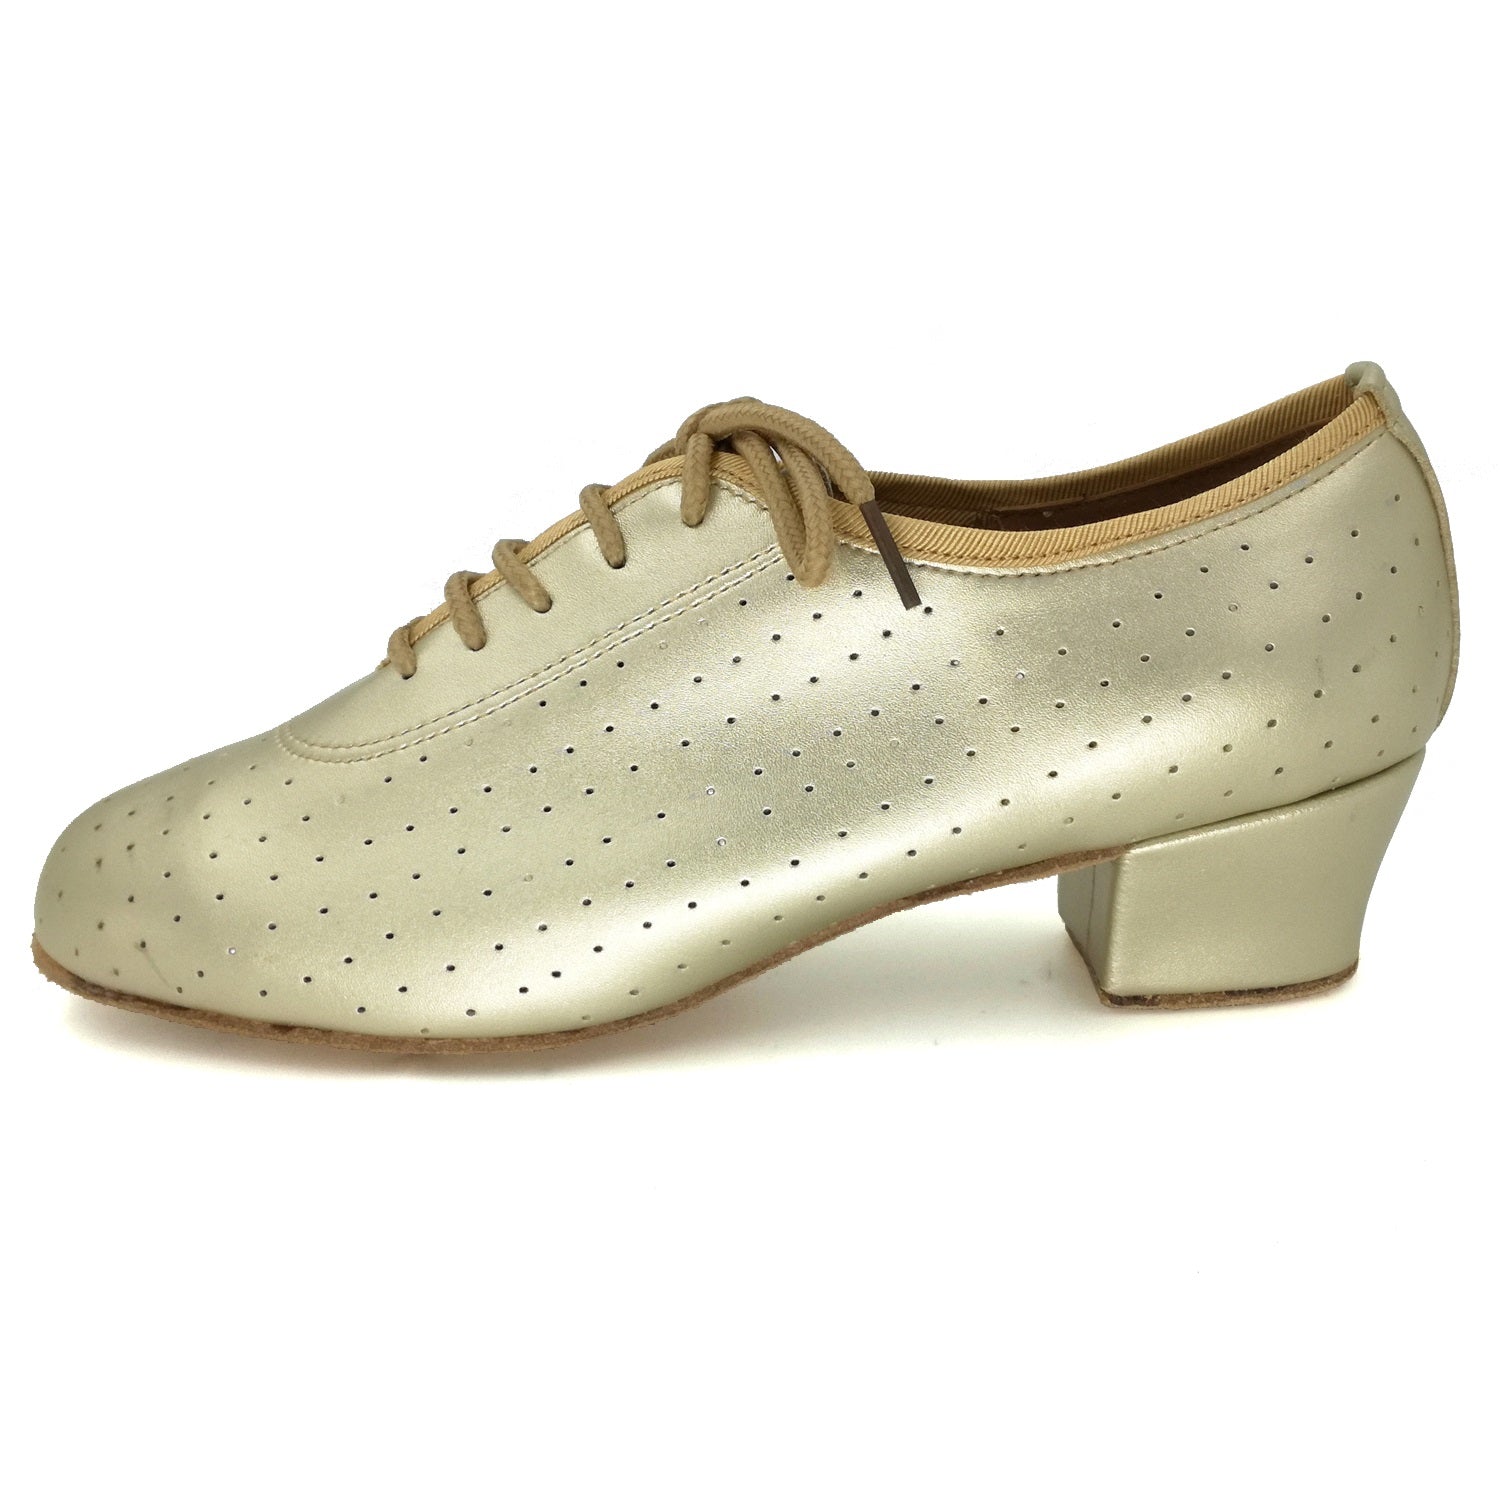 Women Ballroom Dancing Shoes with Suede Sole Lace-up Closed-toe in Gold for Tango Latin Practice (PD5002D)1